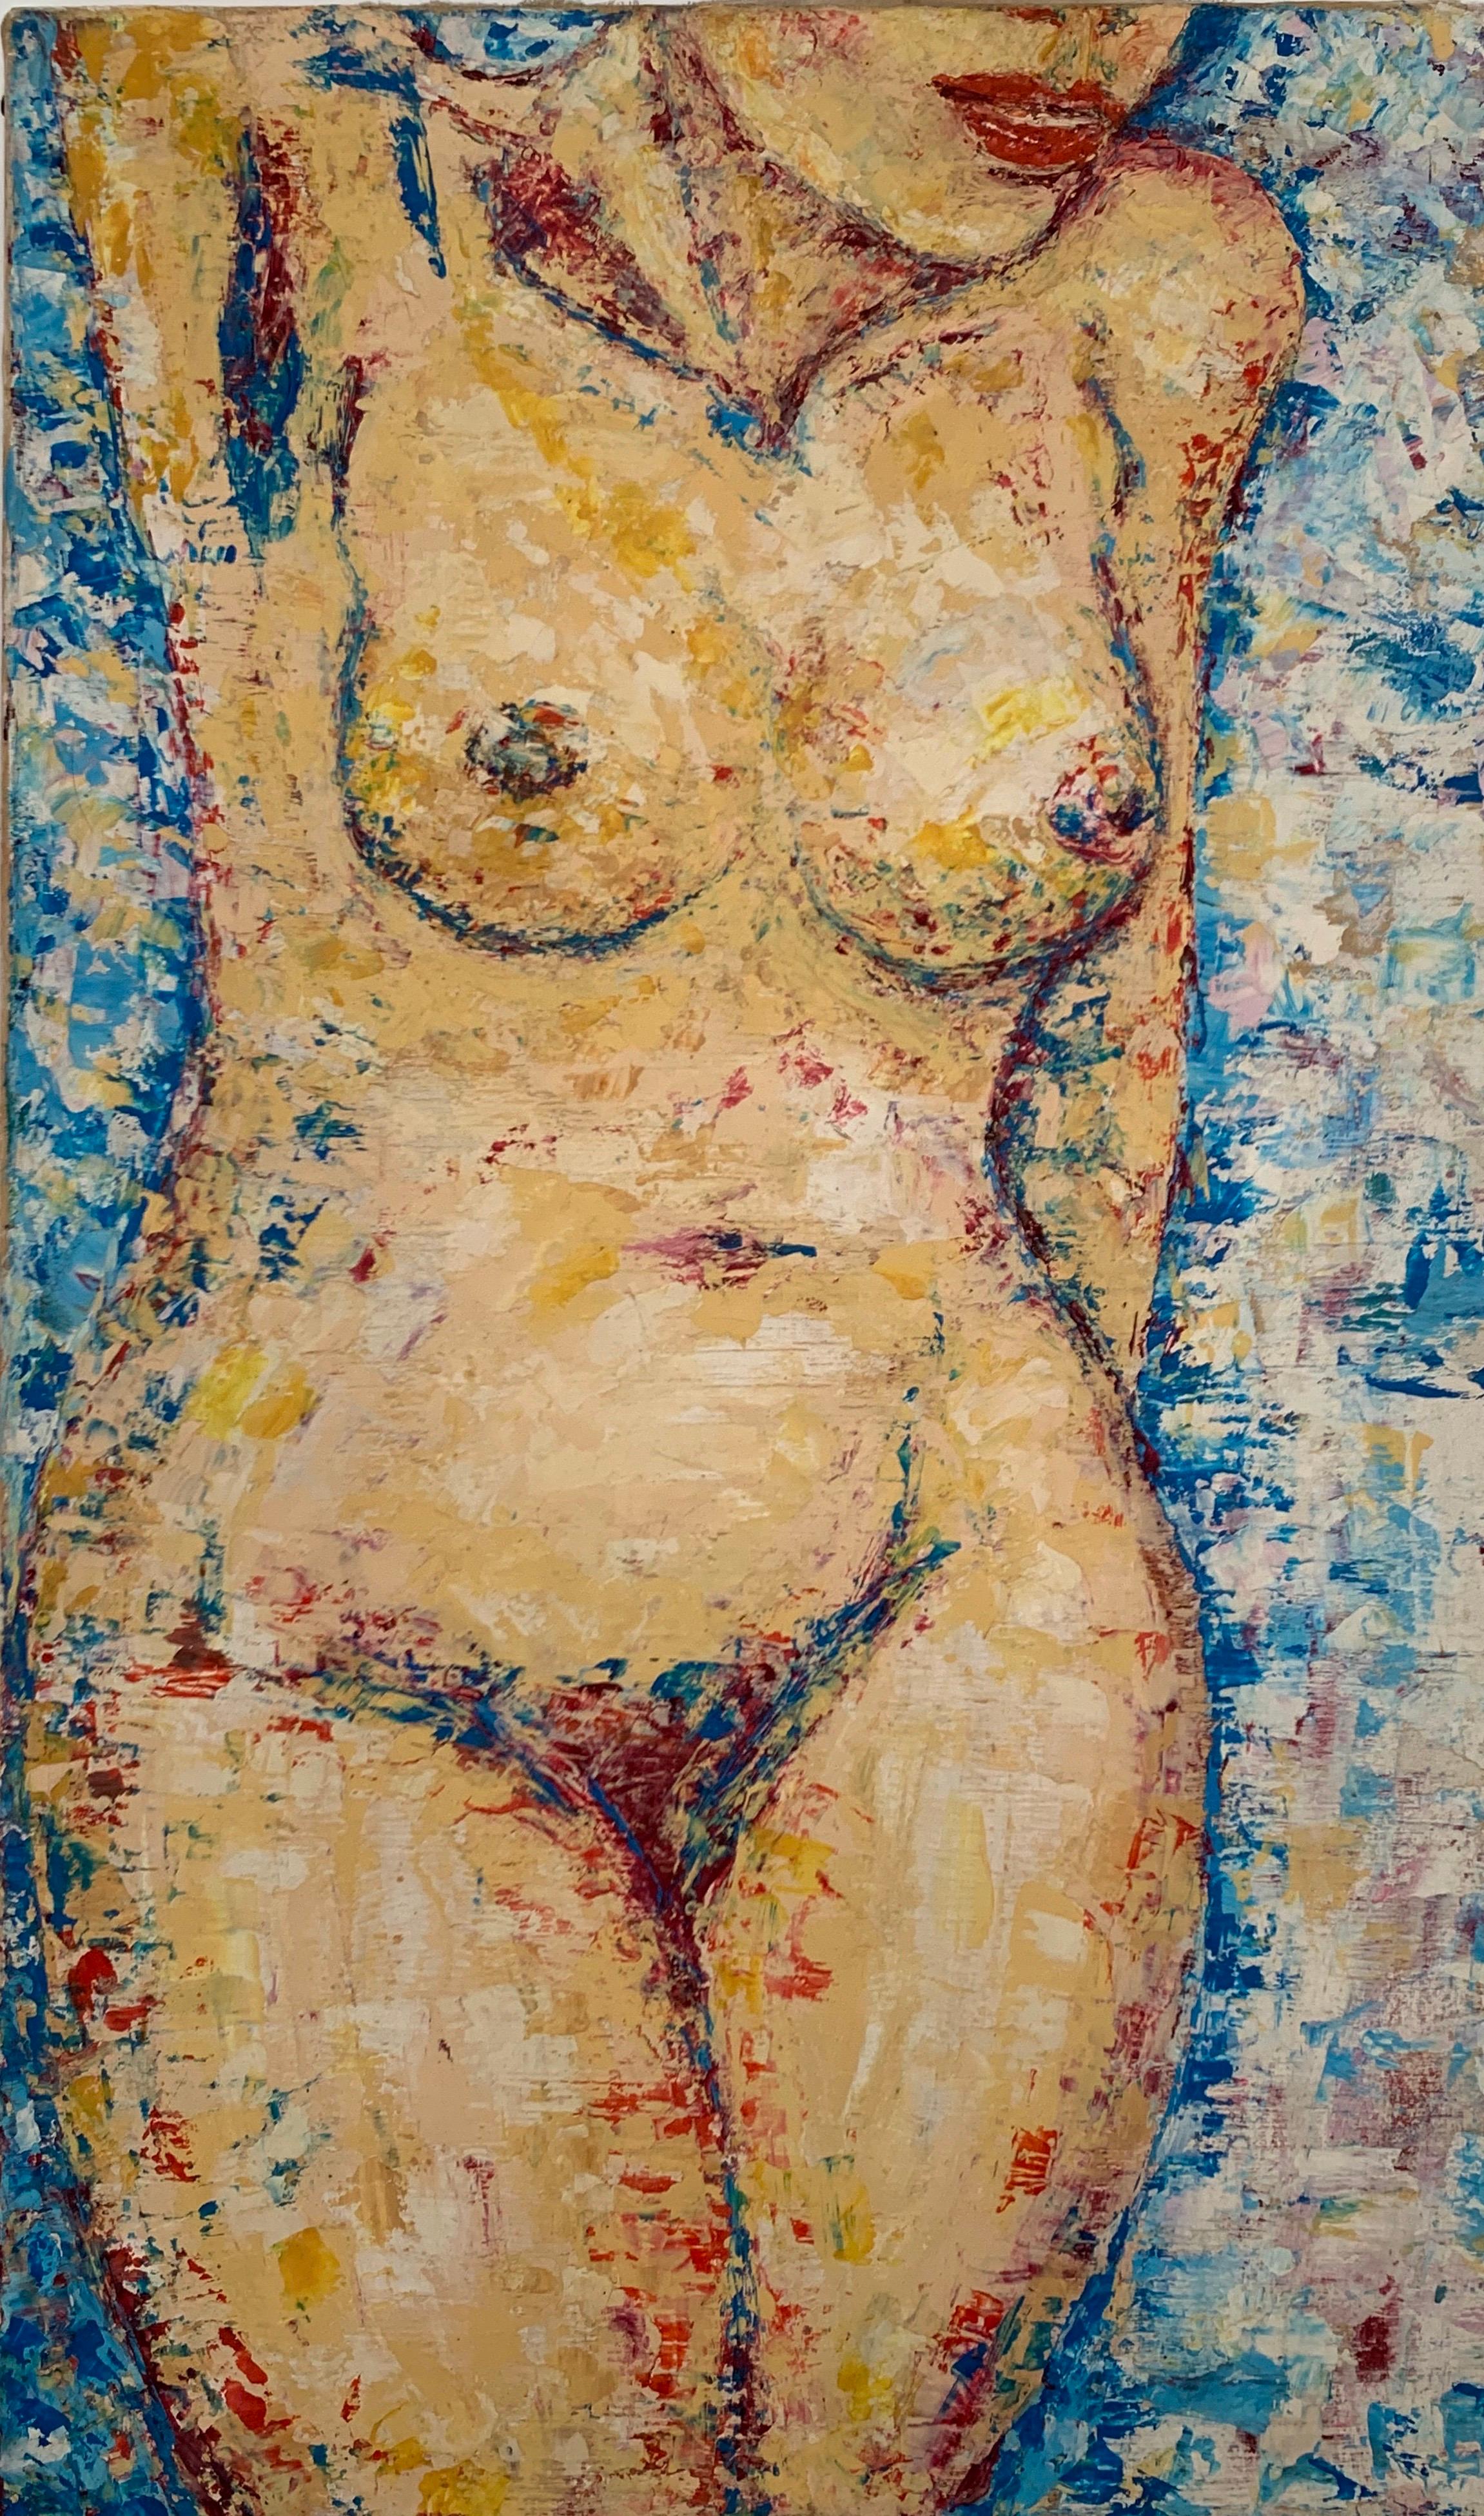 Unknown Figurative Painting - 1970's FRENCH POST-IMPRESSIONIST OIL - NUDE LADY SUNBATHING BLUE BACKGROUND